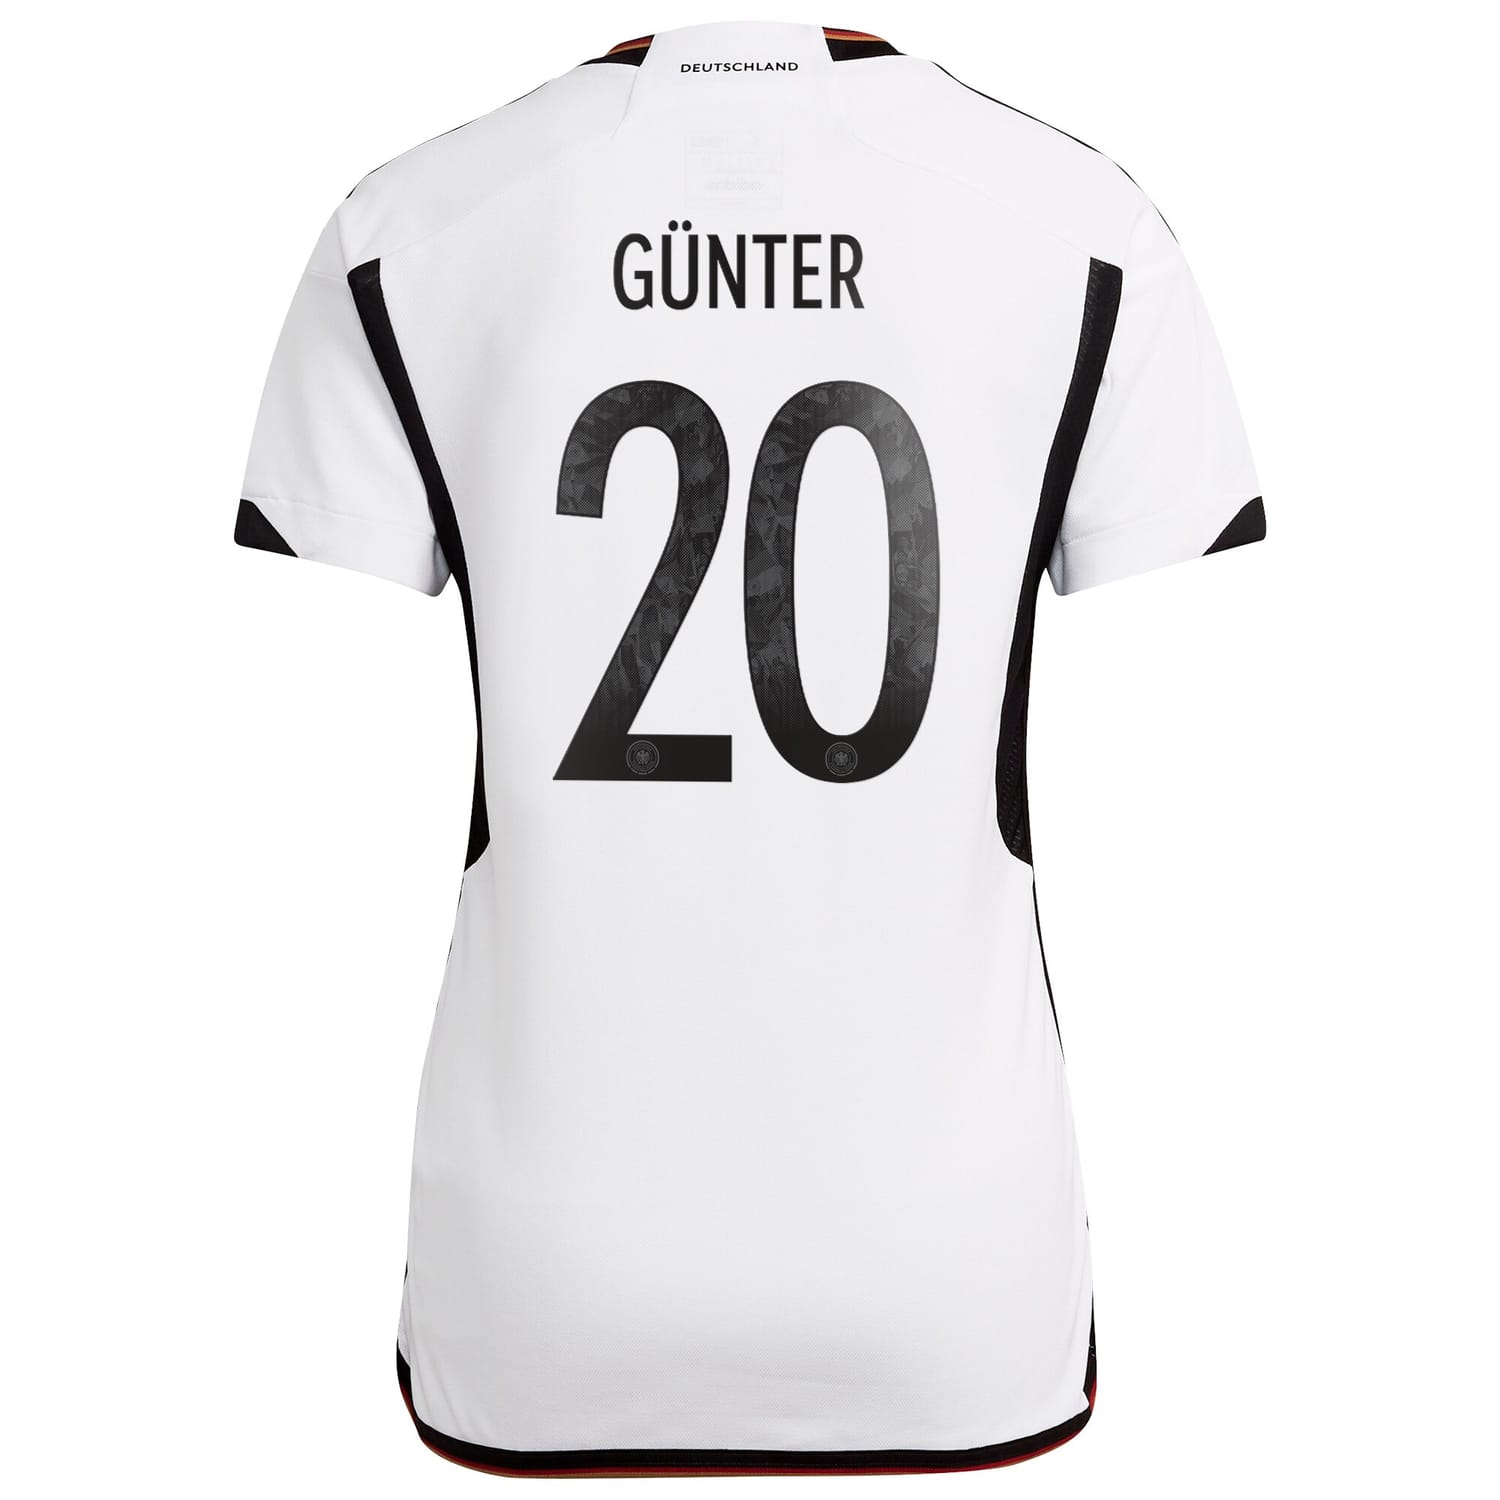 Germany National Team Home Jersey Shirt 2022 player Christian Günter 20 printing for Women